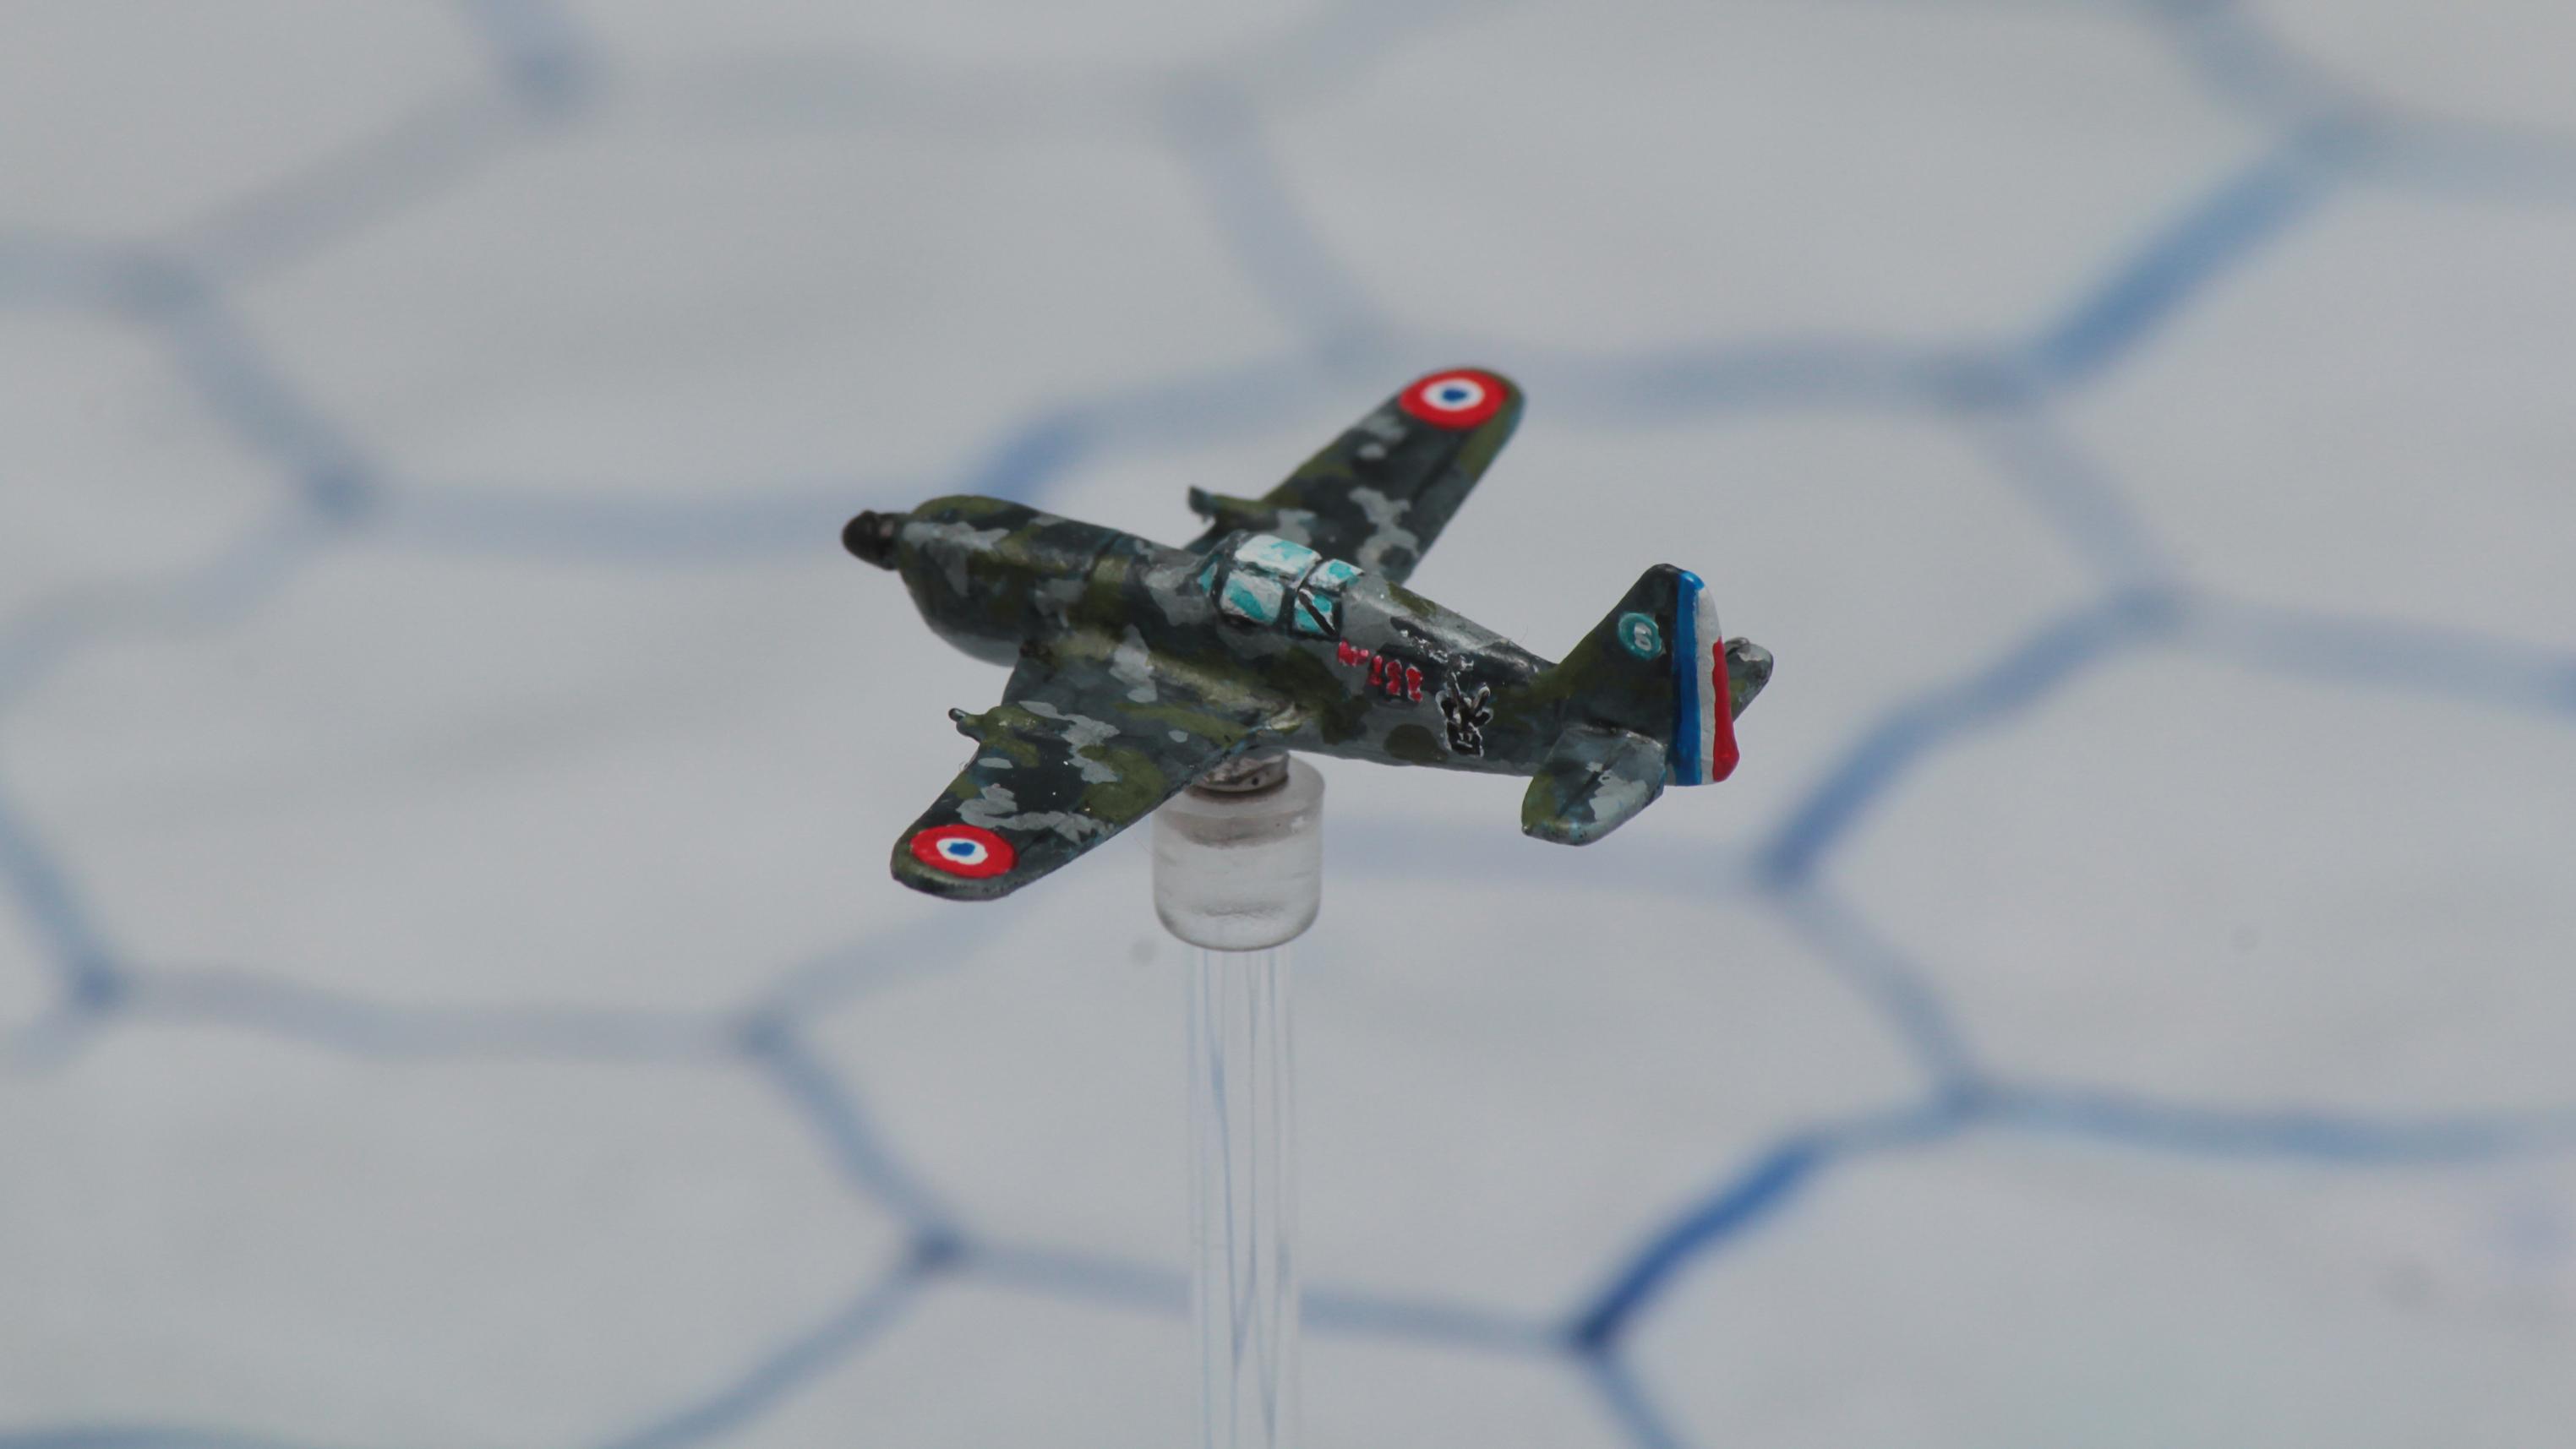 1:300 Scale, 6mm, 6mm Scale, Air Combat, Aircraft, Arm&eacute;e De L'air, Aviation, Finland, Fliers, France, French, Germans, Historic, Imperial Japan, Italian, Luftwaffe, Raf, Republic Of China, Soviet, Usaaf, World War 2